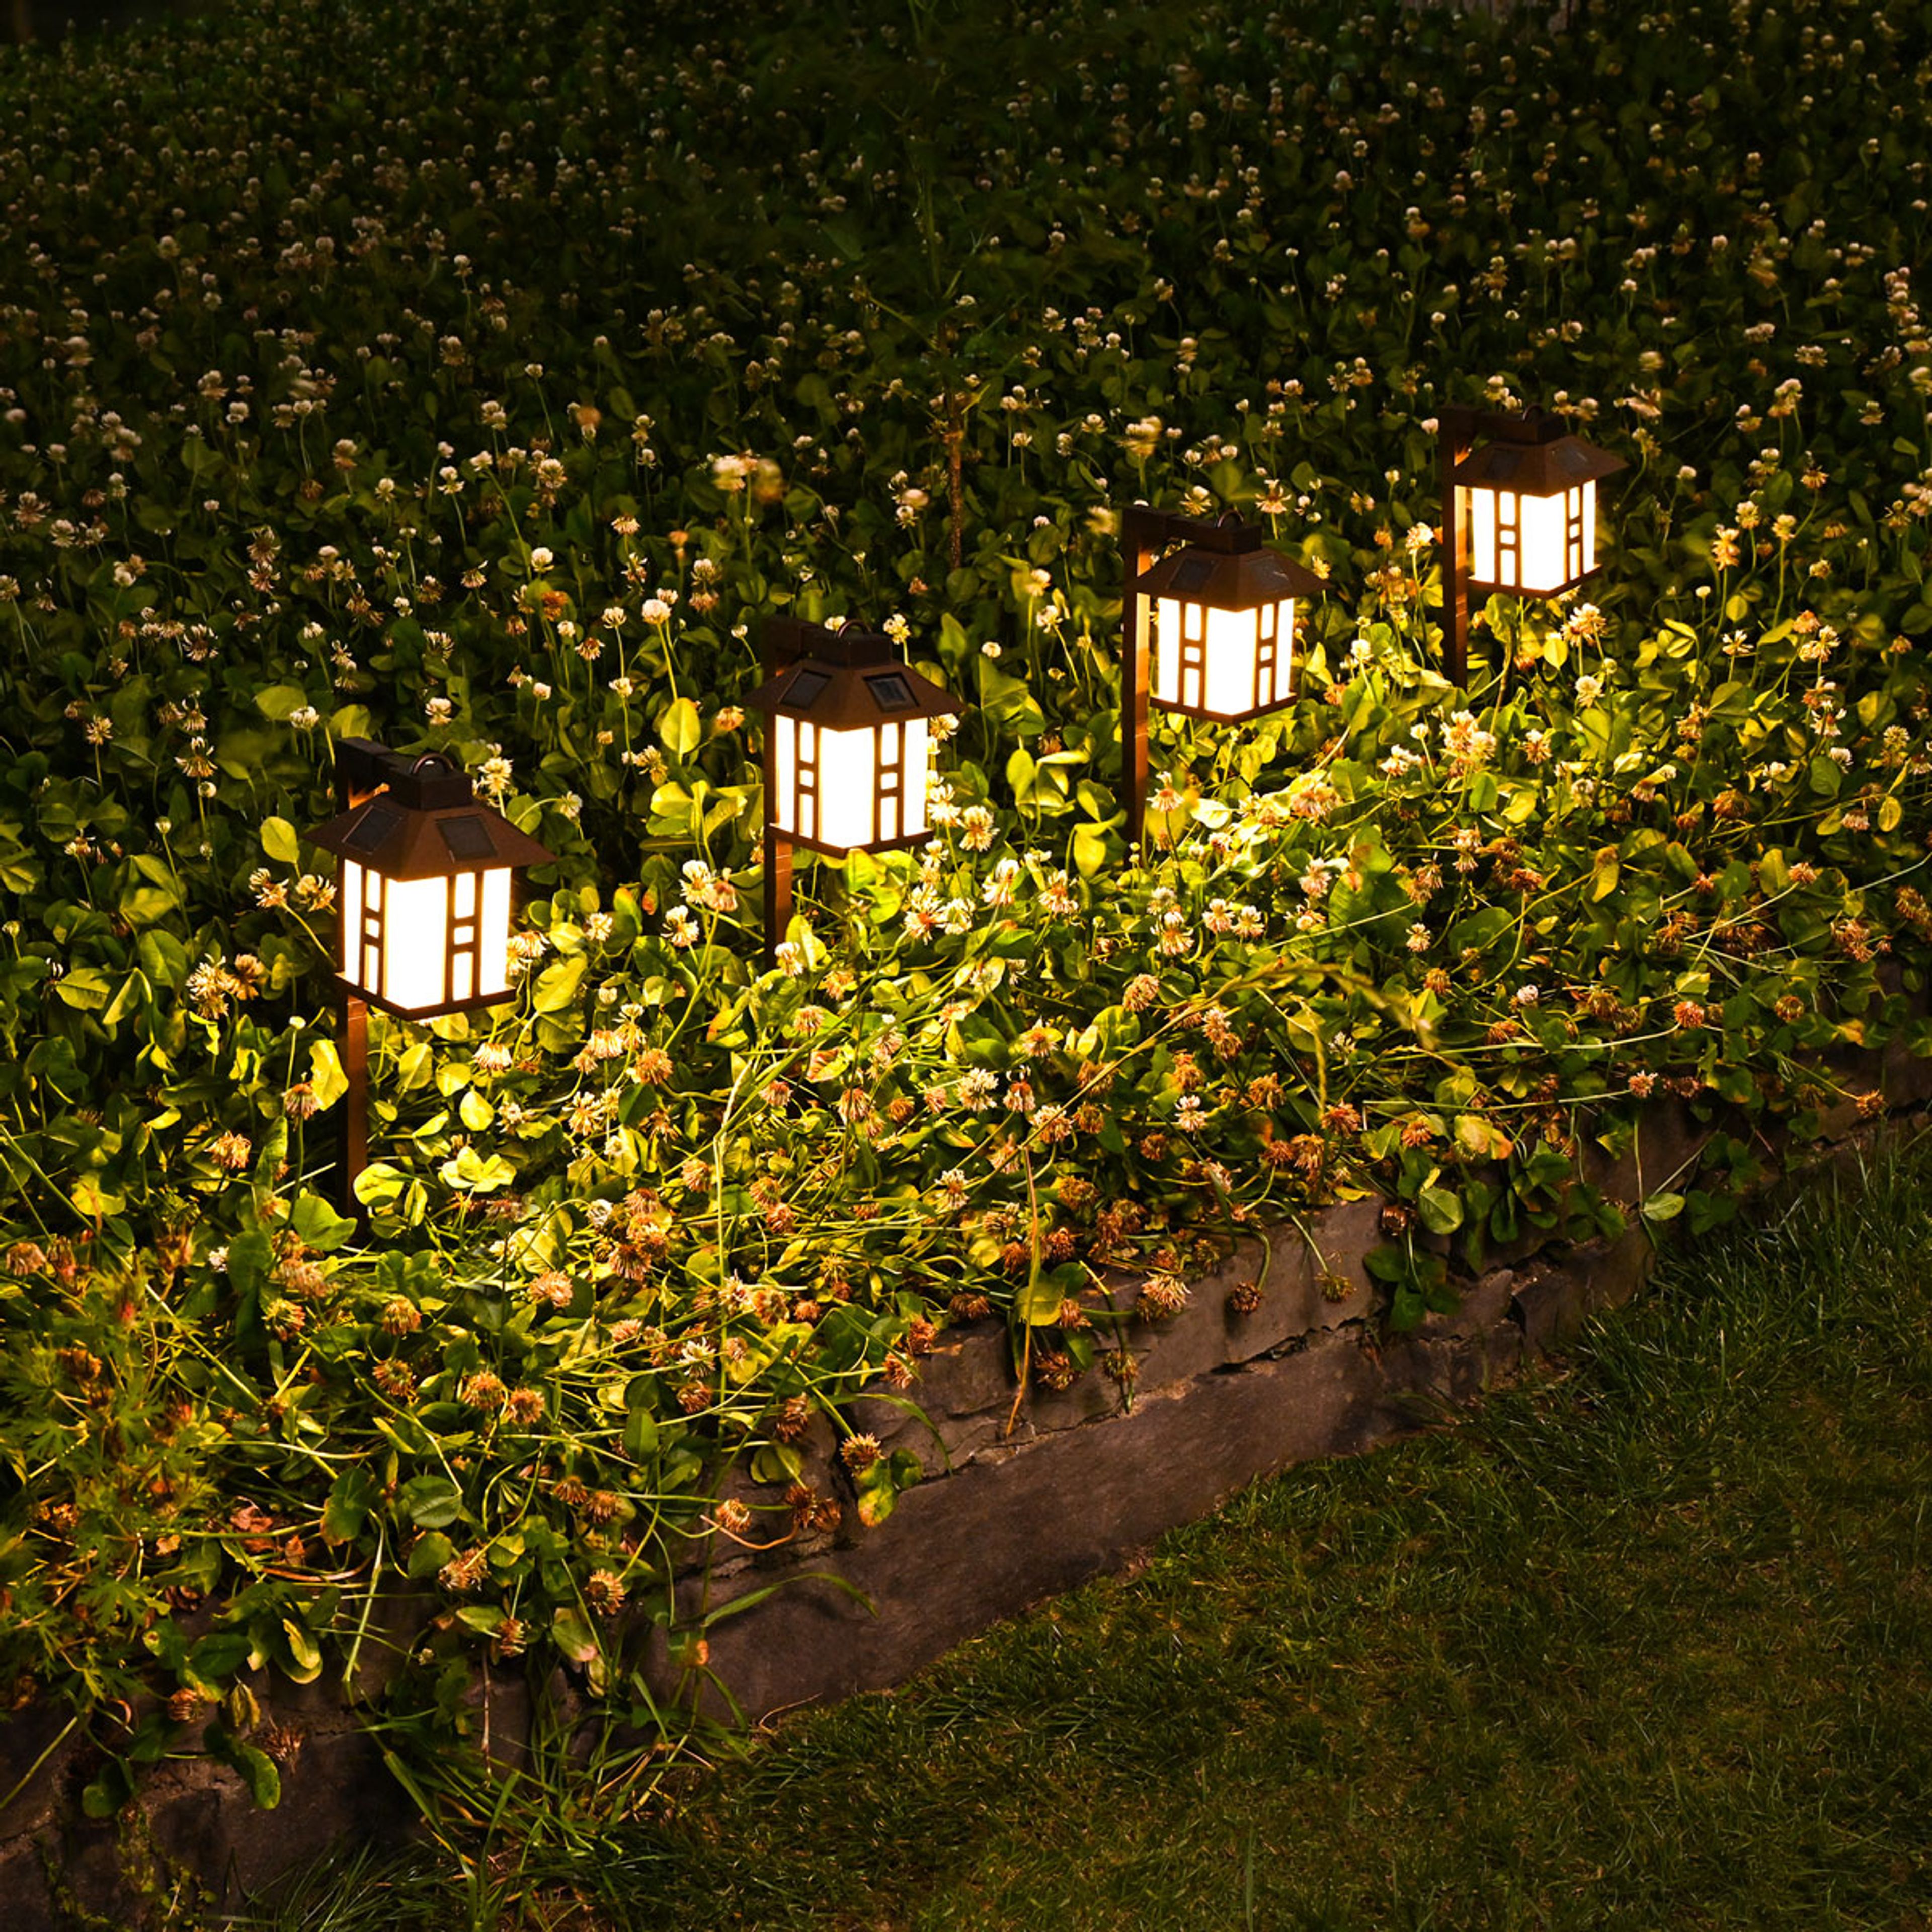 Gigalumi Solar Square Sconce Walkway Lights Set (4 Pack)